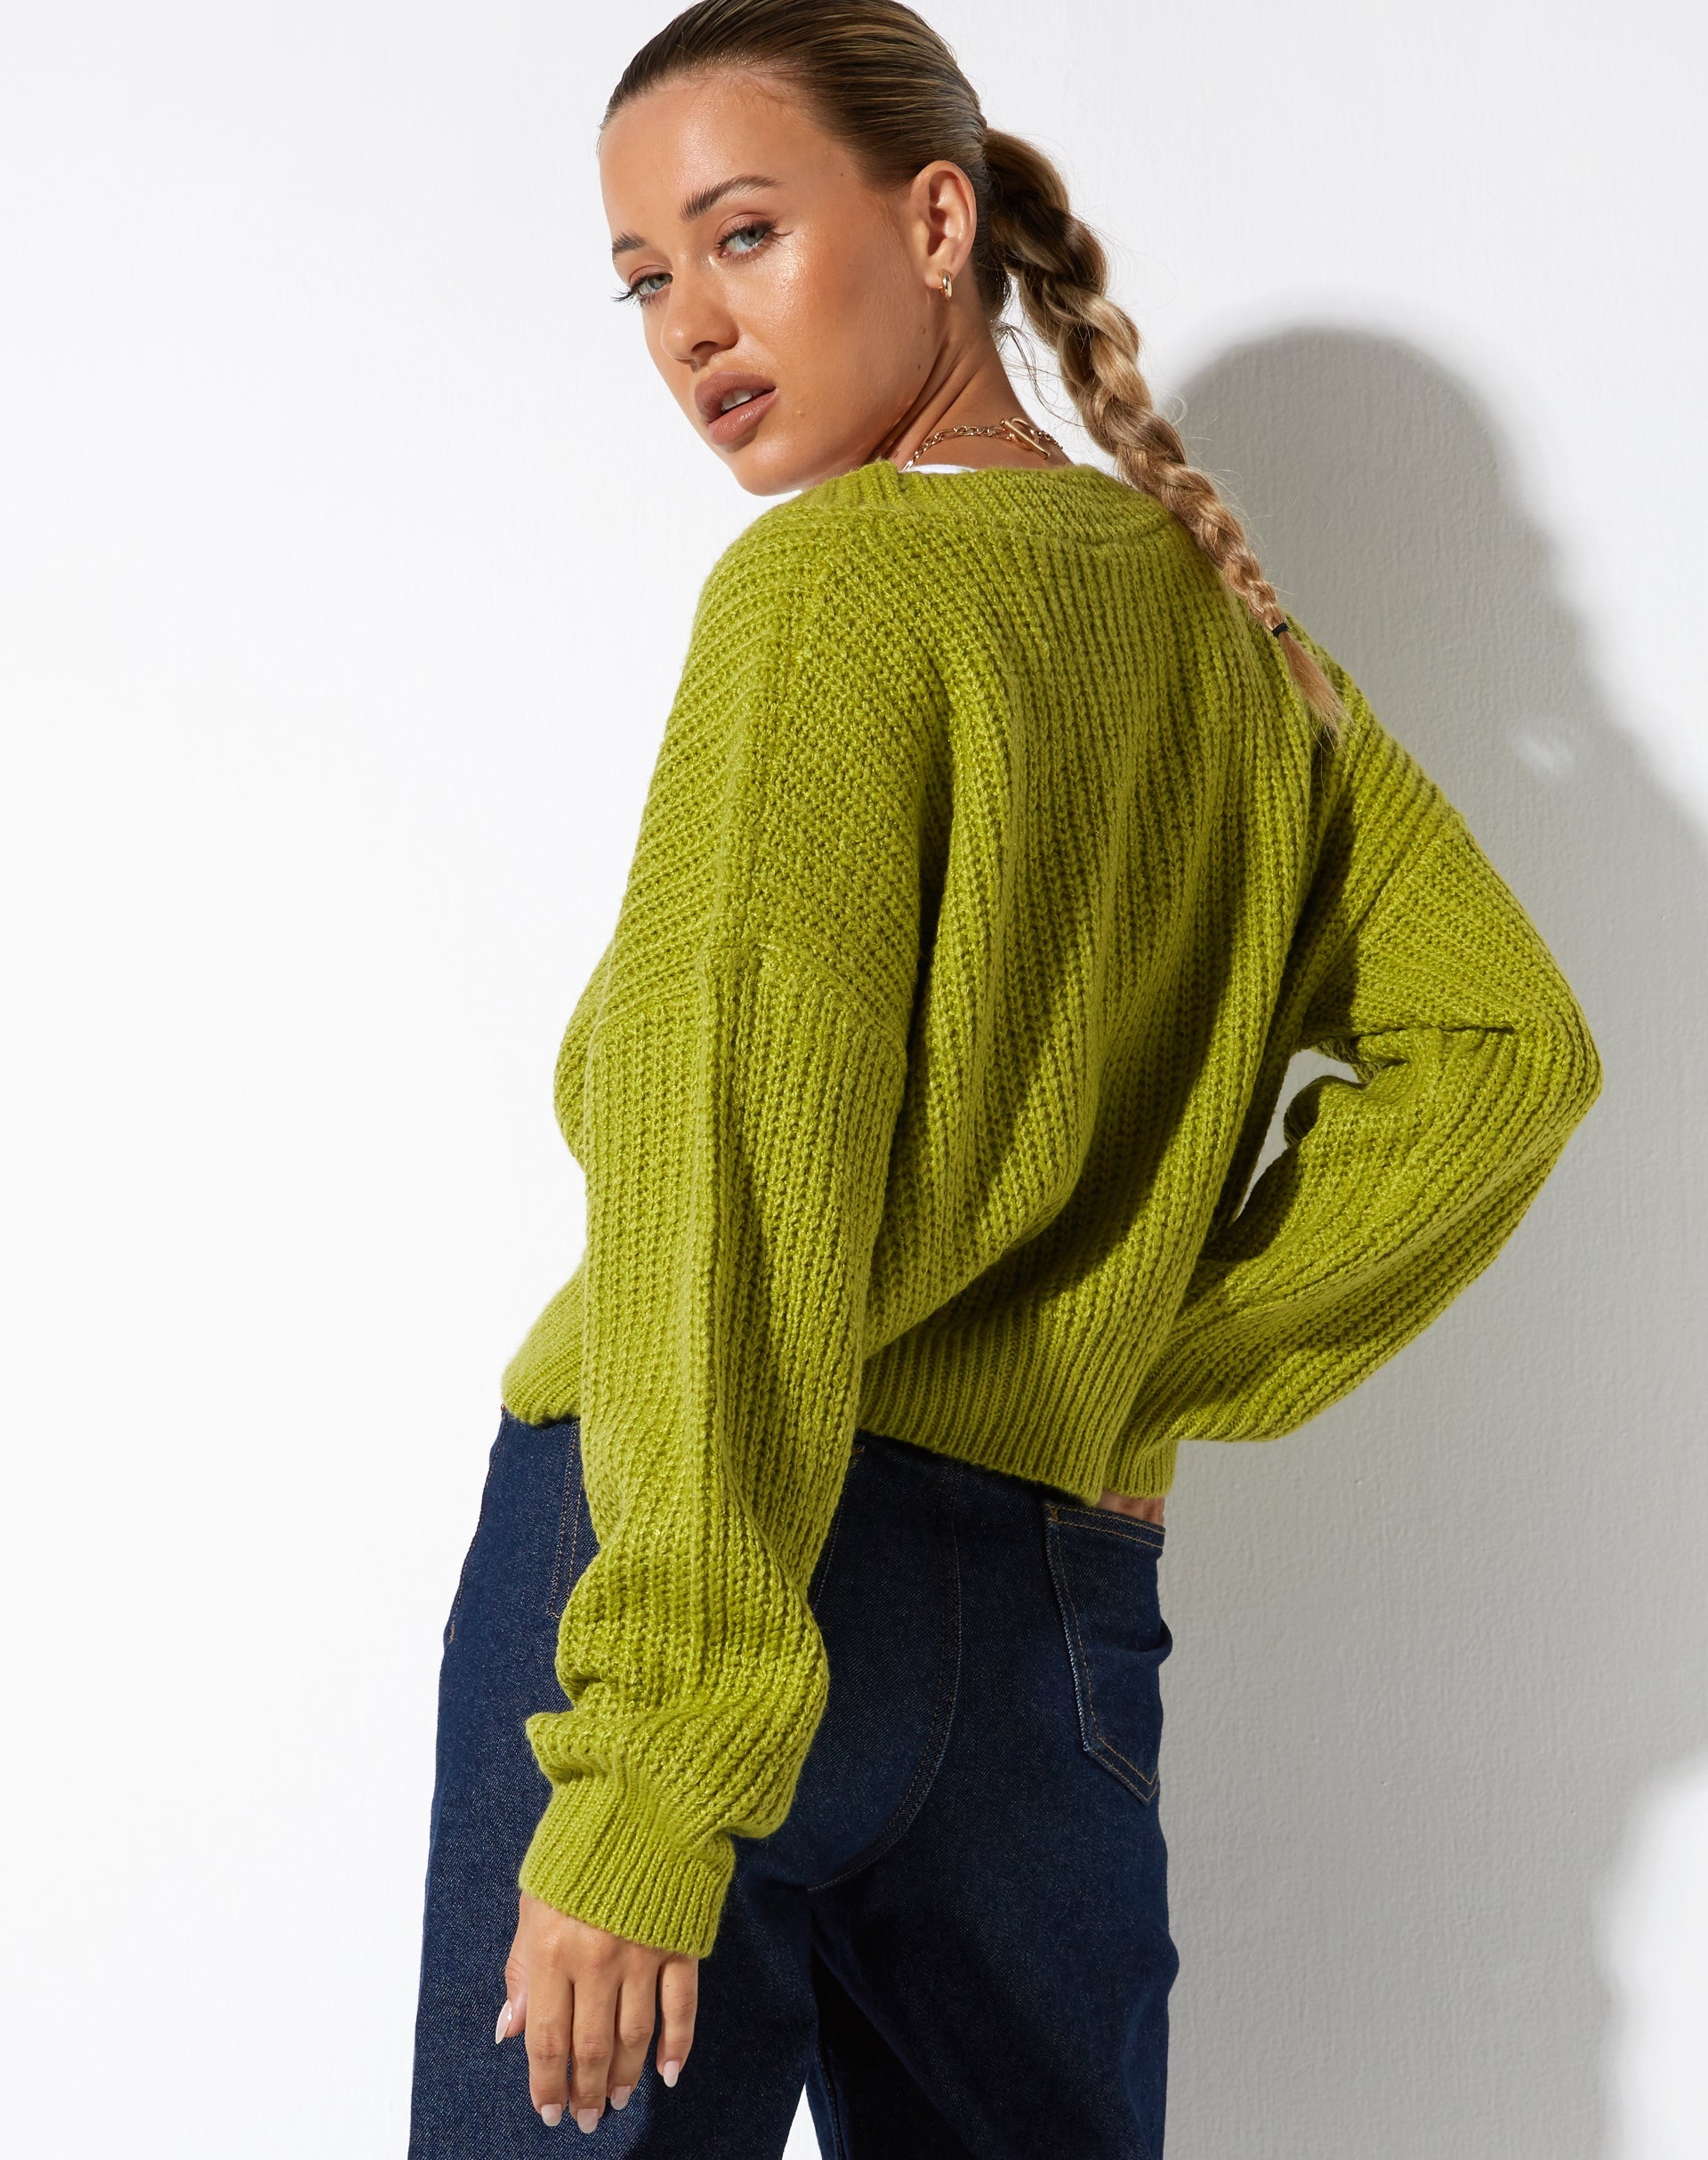 image of Faya Cardigan in Knit Sour Apple